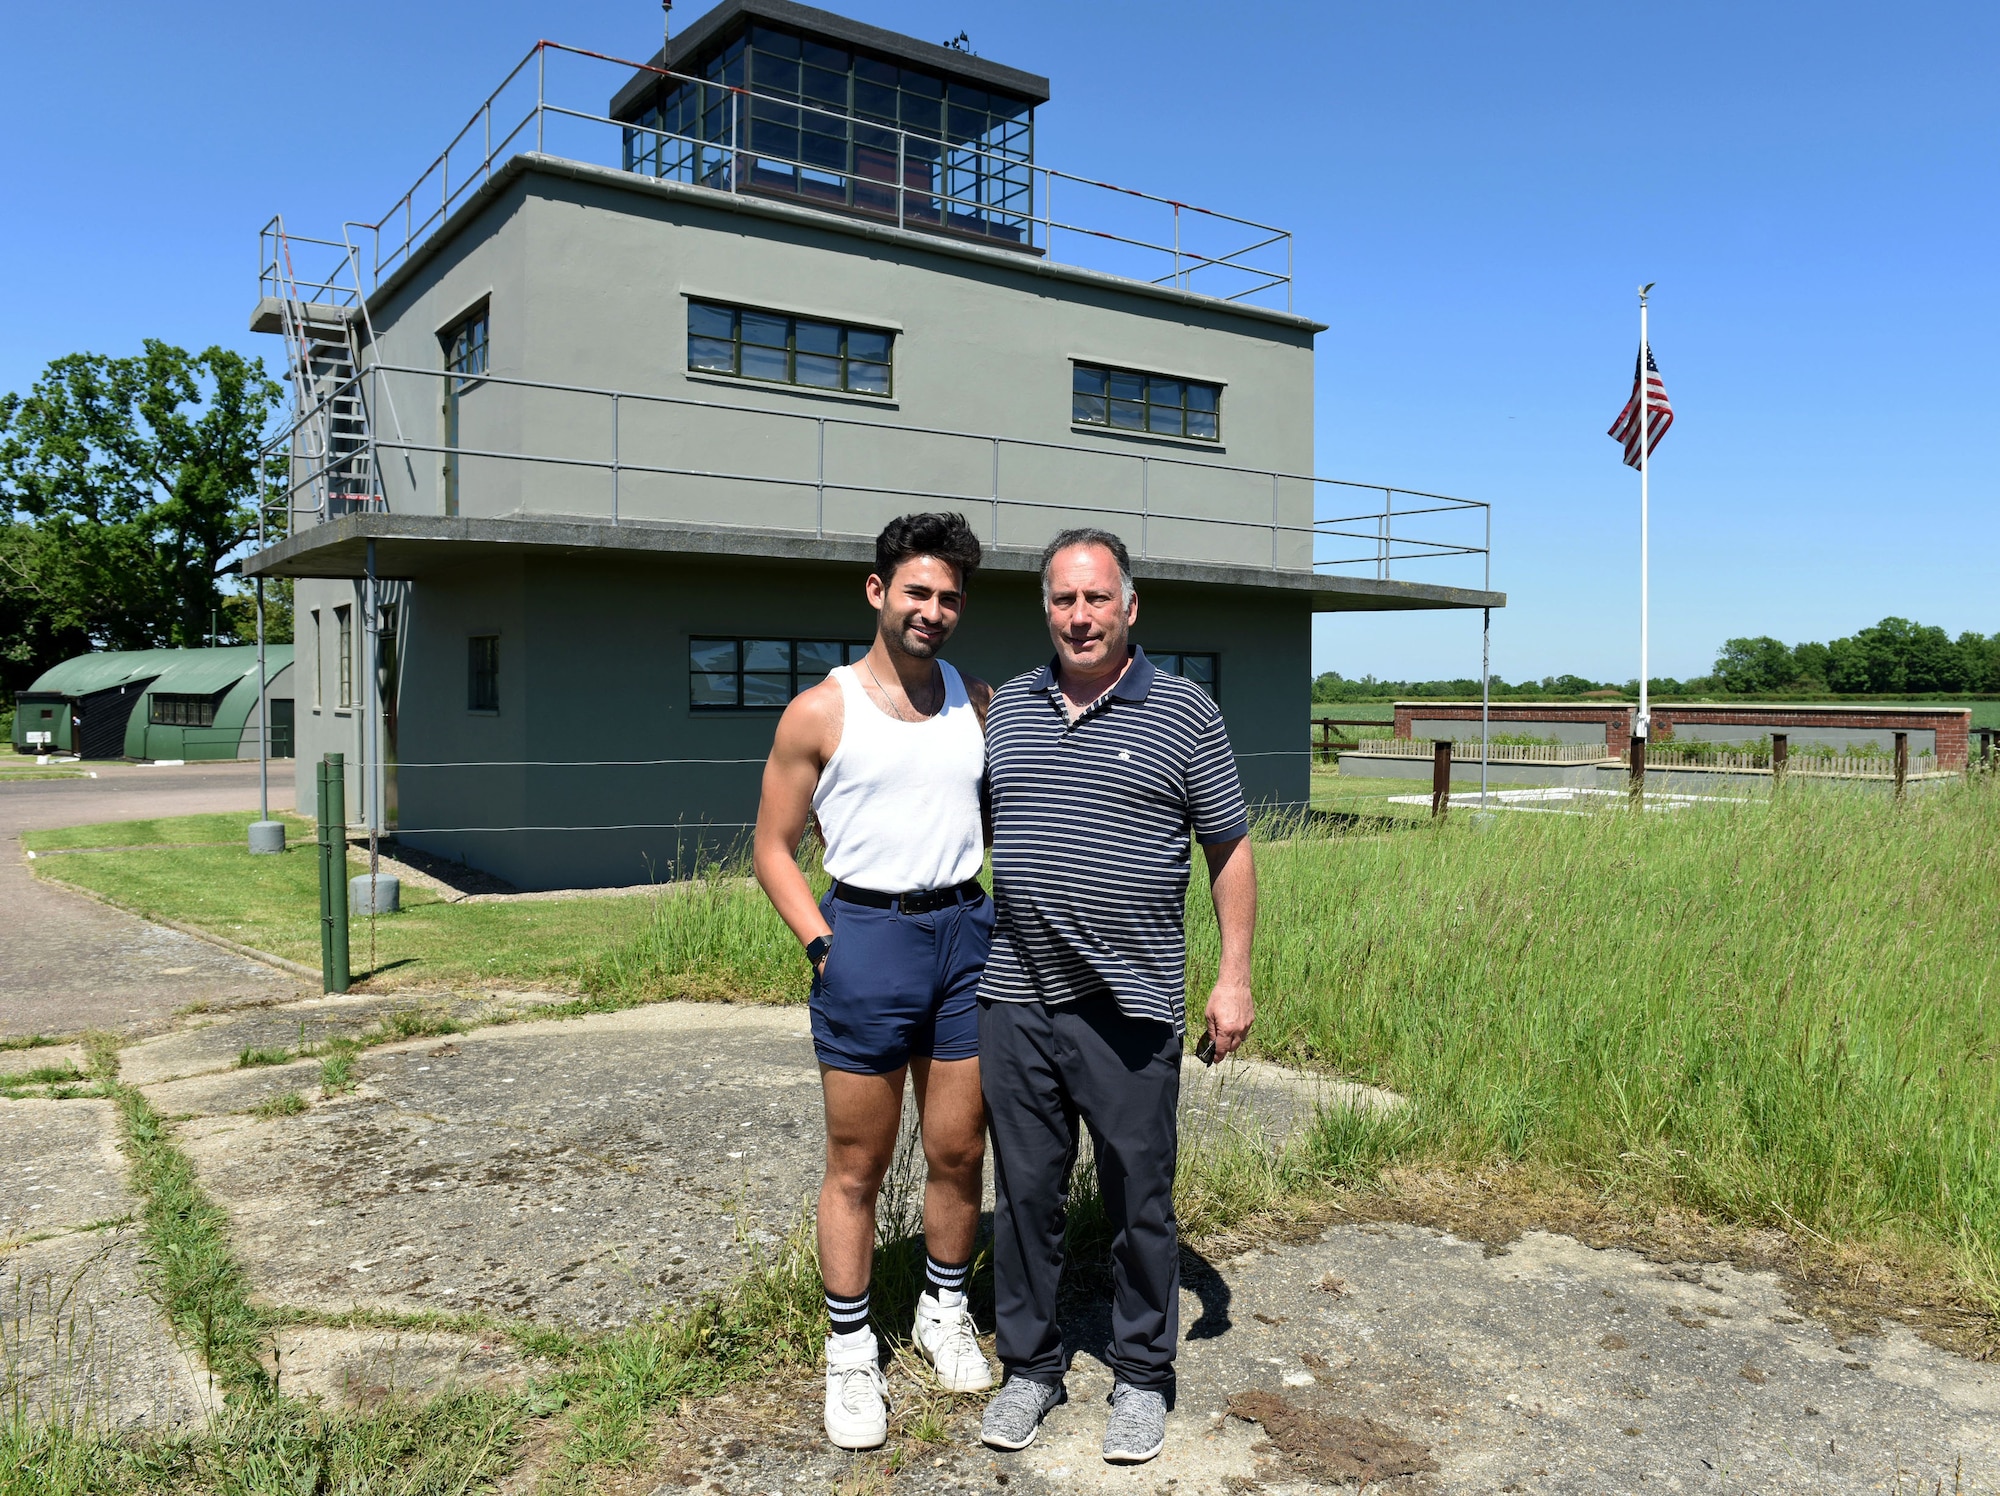 Sam and Dan Rosenthal, grandson and son of Lt. Col. Robert “Rosie” Rosenthal, pose for a photo in front of the control tower at the 100th Bomb Group Memorial Museum, Thorpe Abbotts, Diss, England, June 9, 2021. Rosie Rosenthal was a former pilot assigned to the 418th Bomb Squadron, 100th Bombardment Group, from September 1943 to September 1944 and flew 52 missions rather than the average 25. Dan and Sam visited England to attend the nose art dedication ceremony for “Rosie’s Riveters” at Royal Air Force Mildenhall, which honors their father and grandfather who passed away in 2007. (U.S. Air Force photo by Karen Abeyasekere)